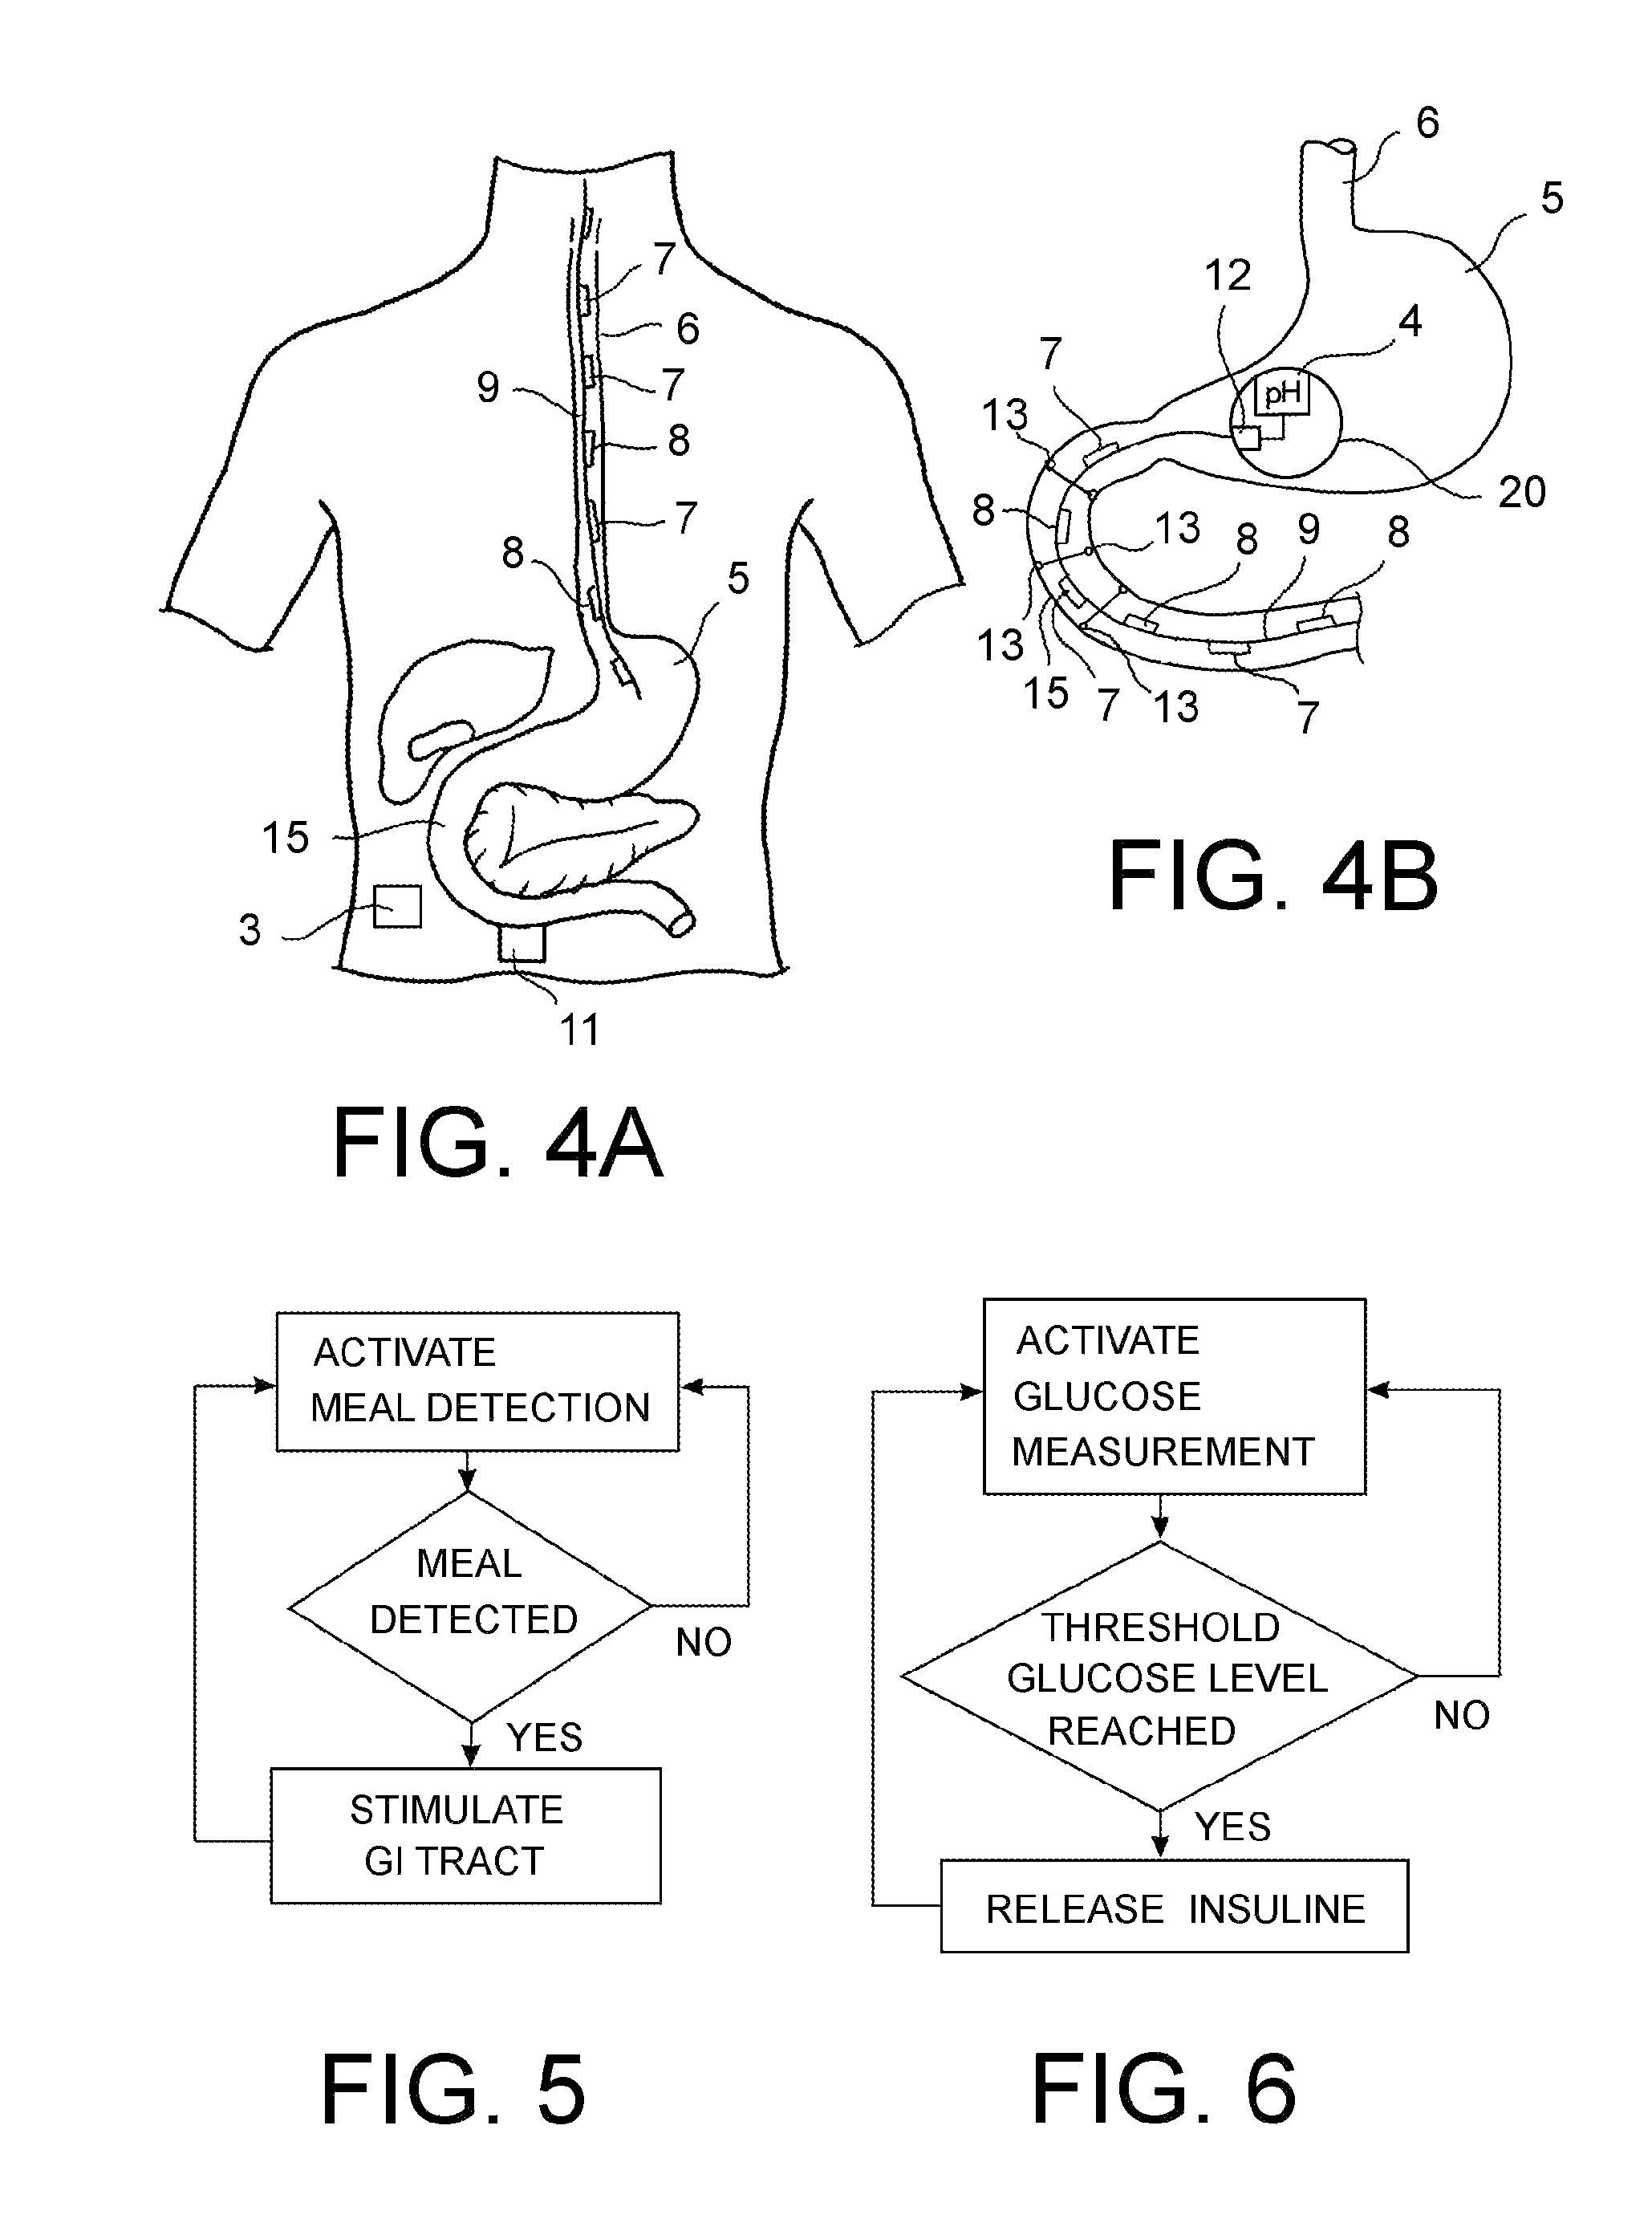 Devices and methods for the treatment of metabolic disorders